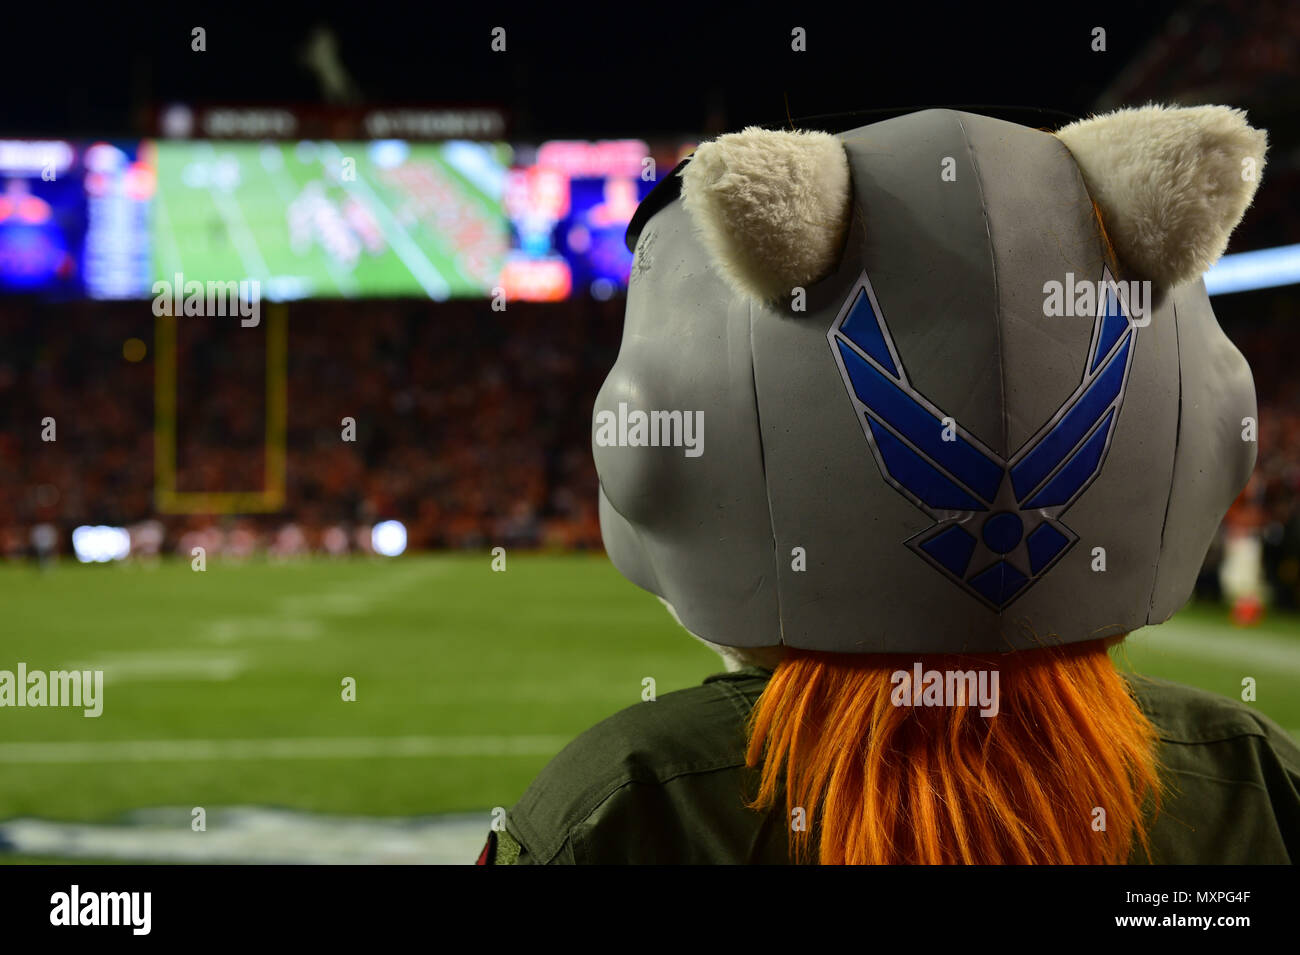 Miles, the Denver Broncos mascot, watches the Broncos play the Kansas City Chiefs Nov. 27, 2016, during a Denver Broncos Salute to Service game Nov. 27, 2016, at Sports Authority Field at Mile High in Denver. The Denver Broncos participate in the Salute to Service campaign to honor veterans and active duty military members. (U.S. Air Force photo by Airman 1st Class Gabrielle Spradling/Released) Stock Photo